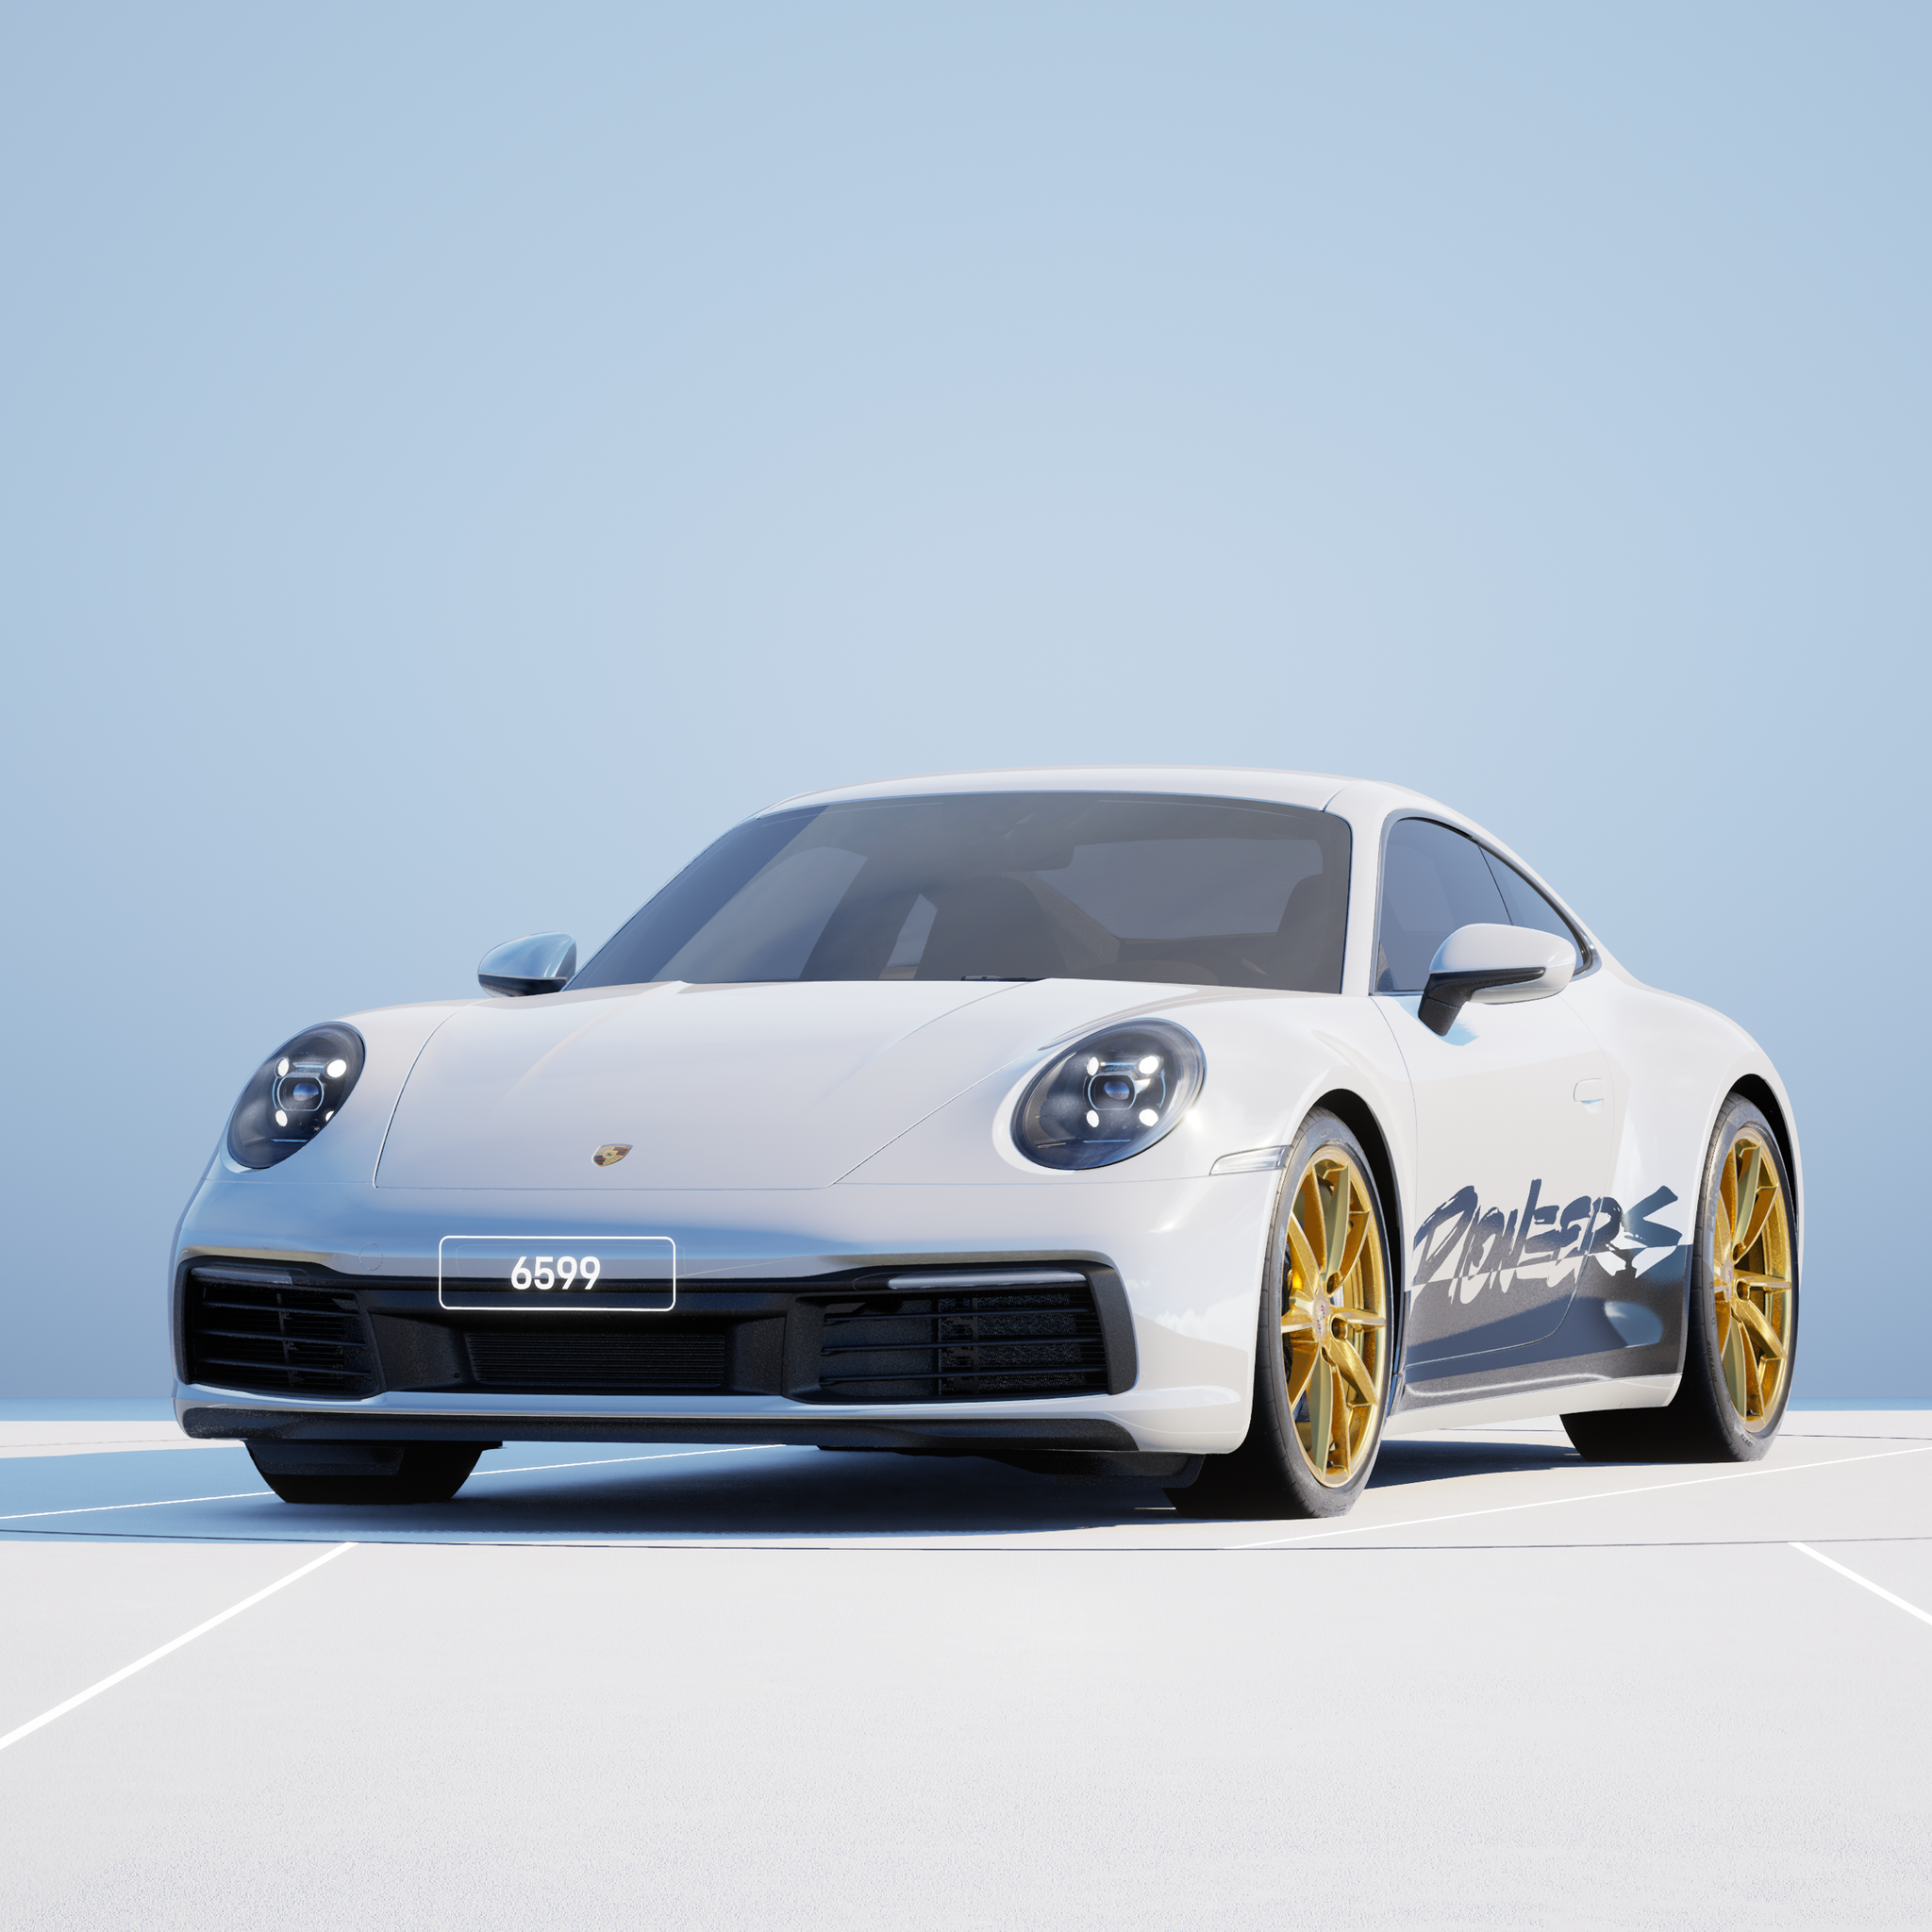 The PORSCHΞ 911 6599 image in phase